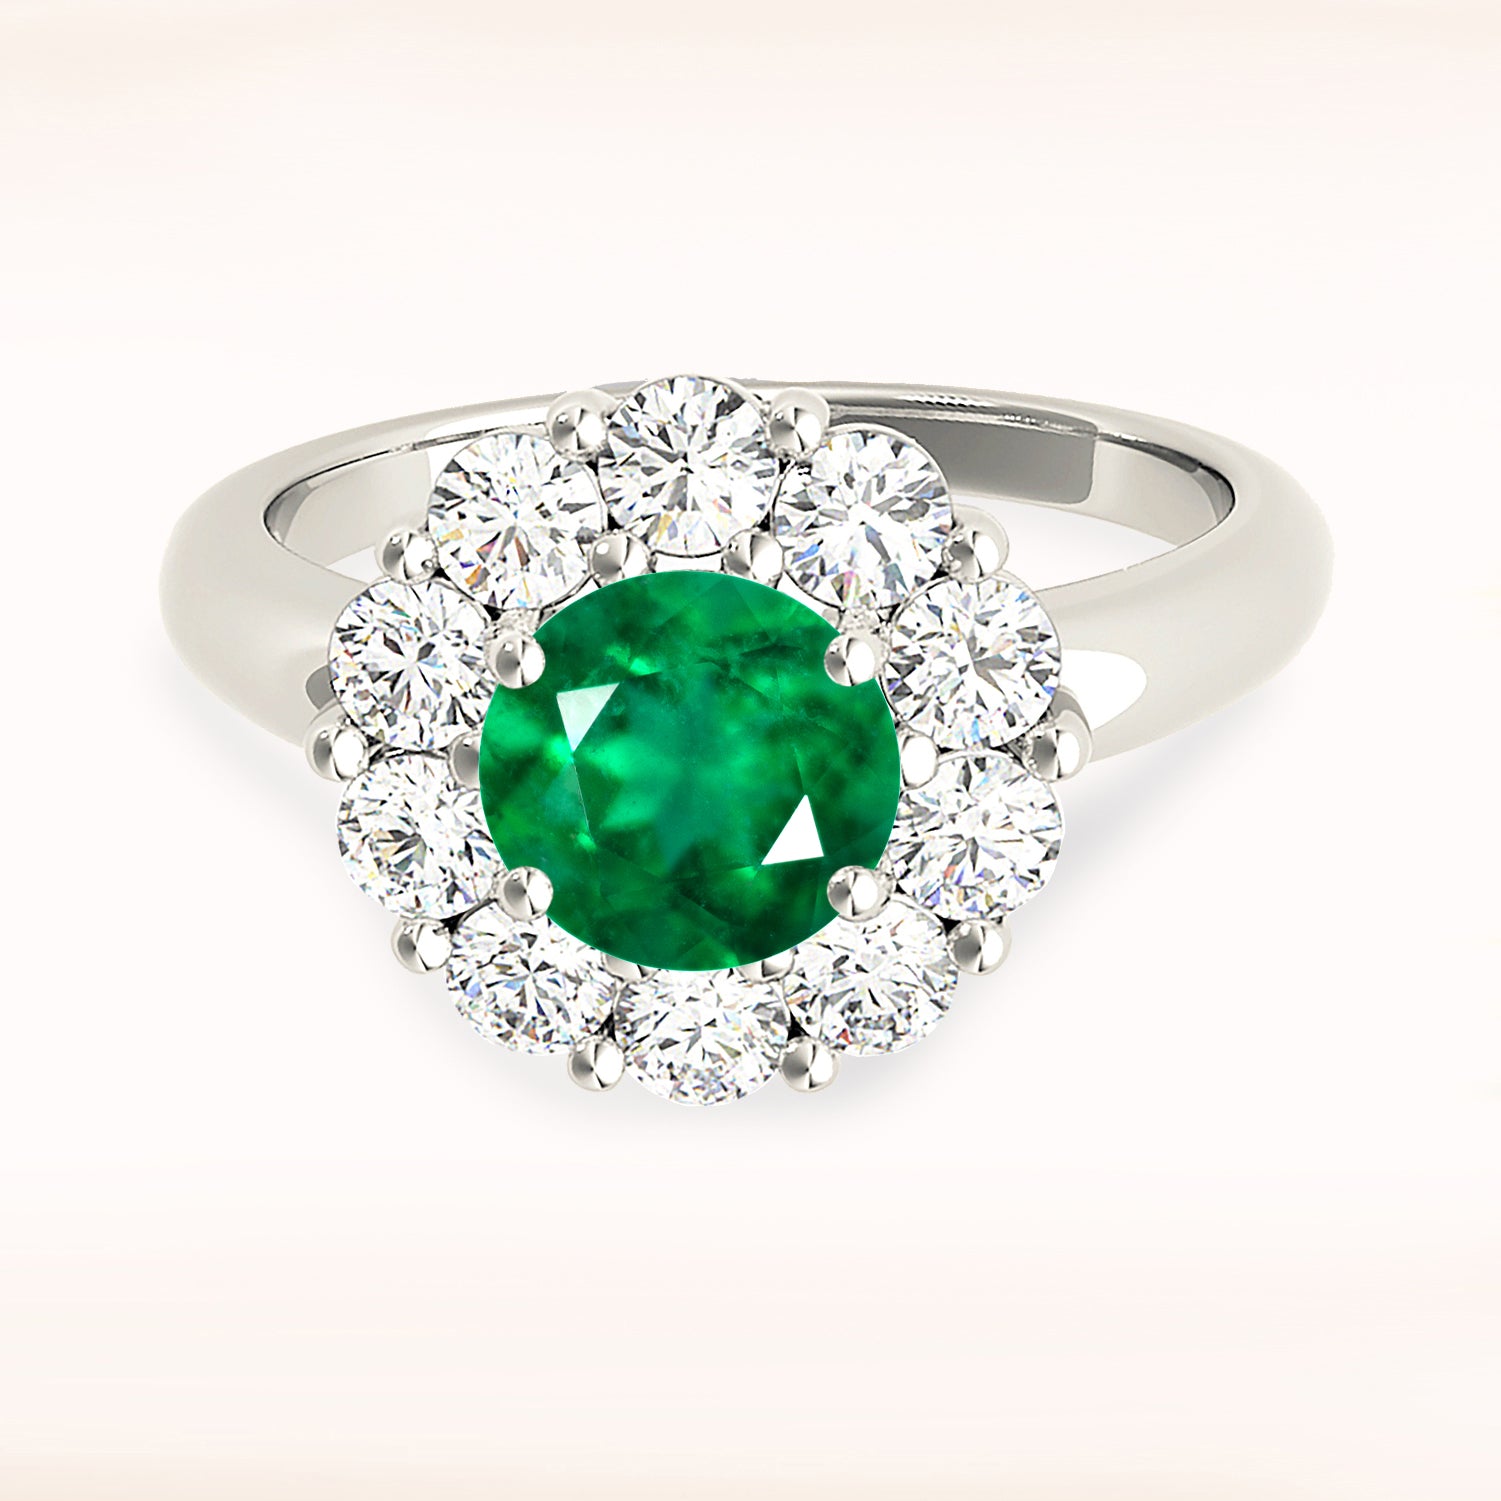 1.75 ct. Genuine Emerald Solitaire Halo Ring With 1.15 ctw. Side Diamonds-in 14K/18K White, Yellow, Rose Gold and Platinum - Christmas Jewelry Gift -VIRABYANI